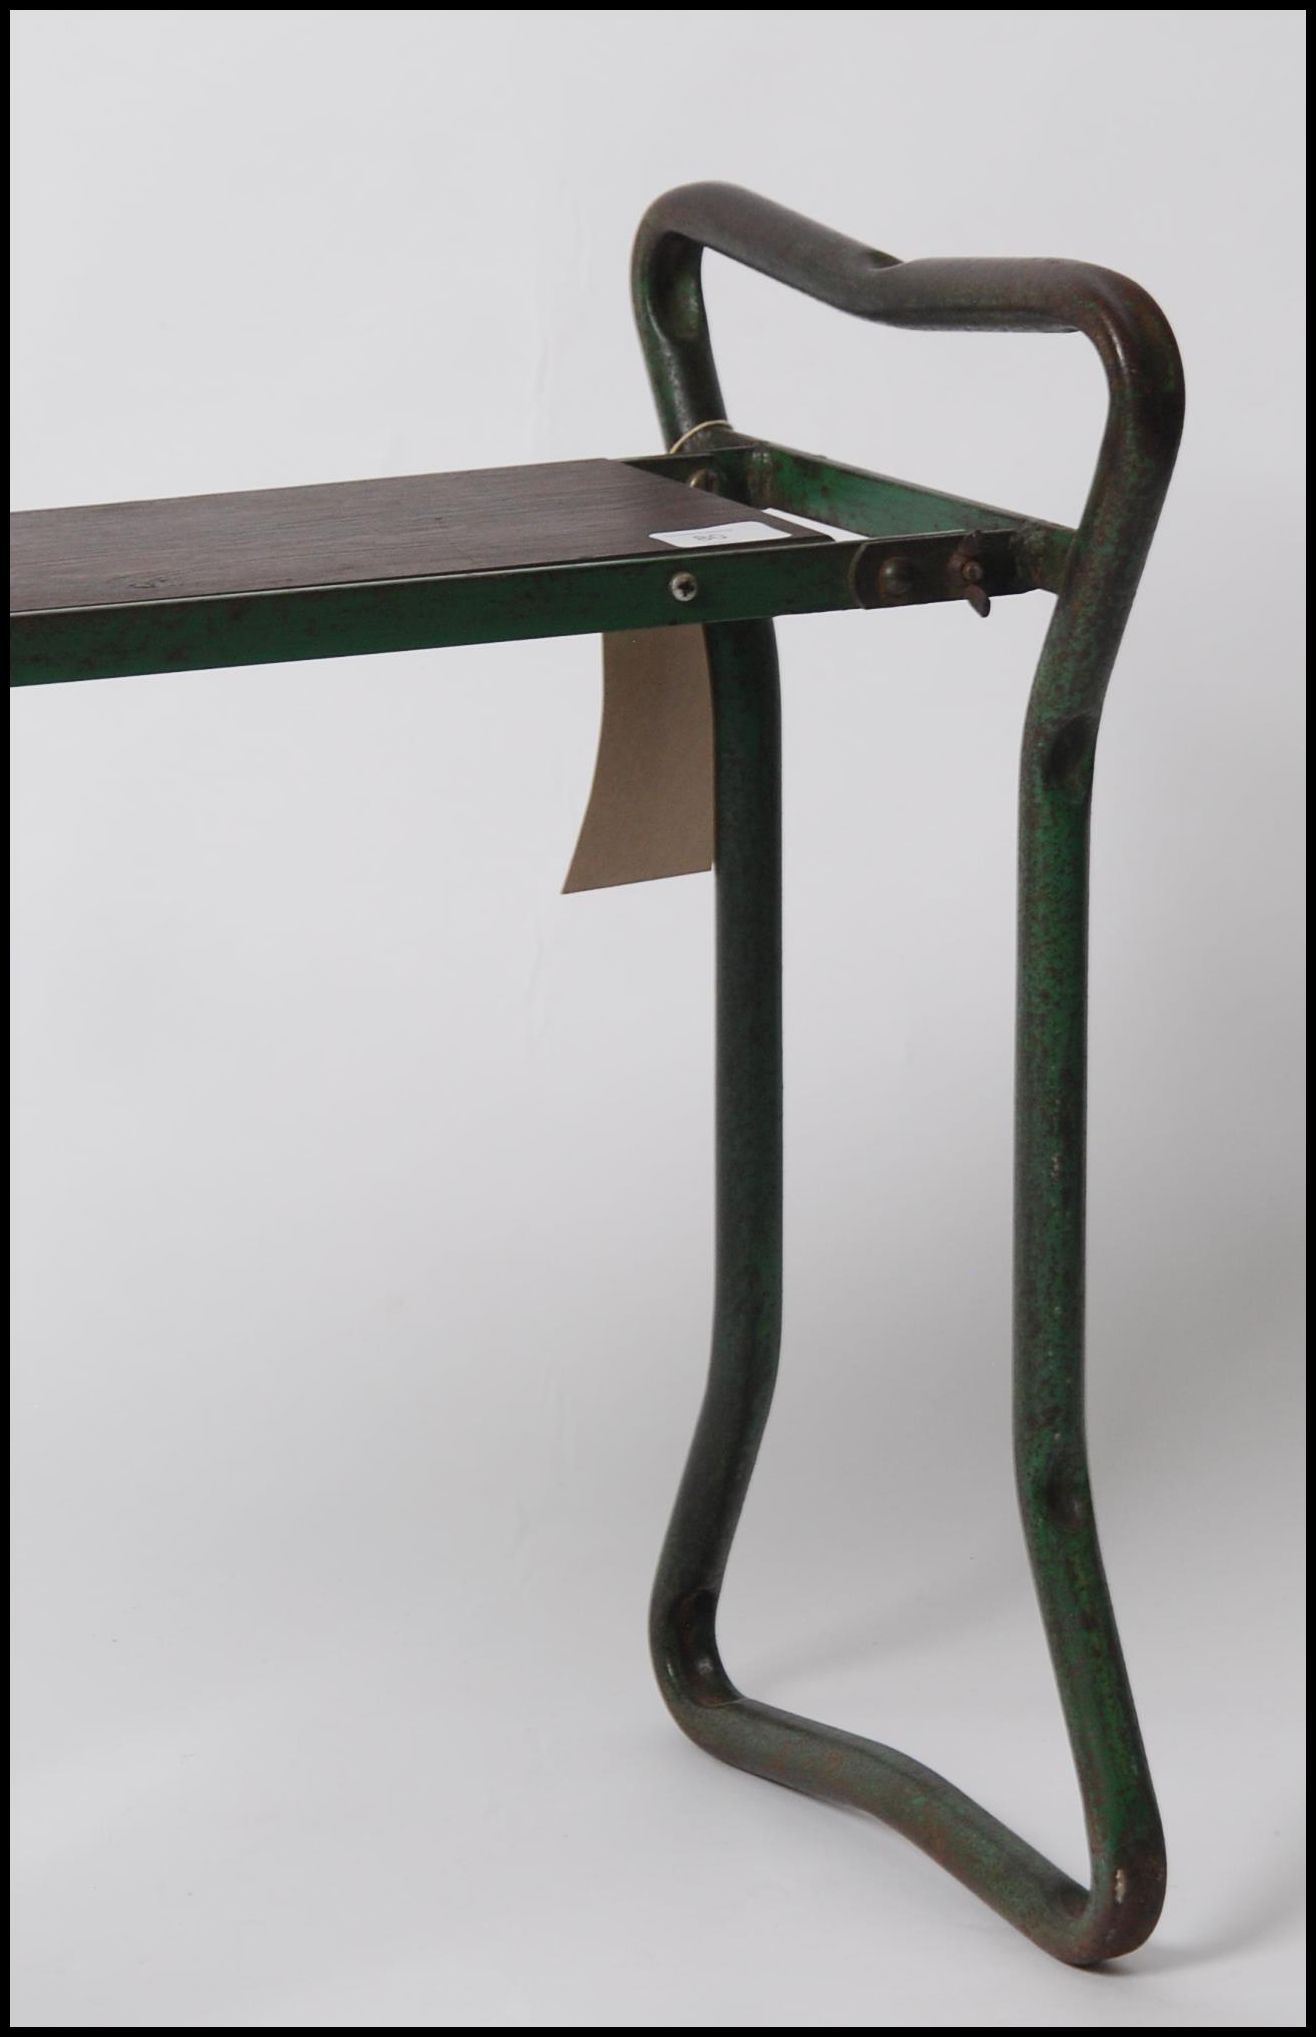 A vintage mid century 1950's tubular metal stool - bench seat having a polished pine plank seat - - Image 5 of 6